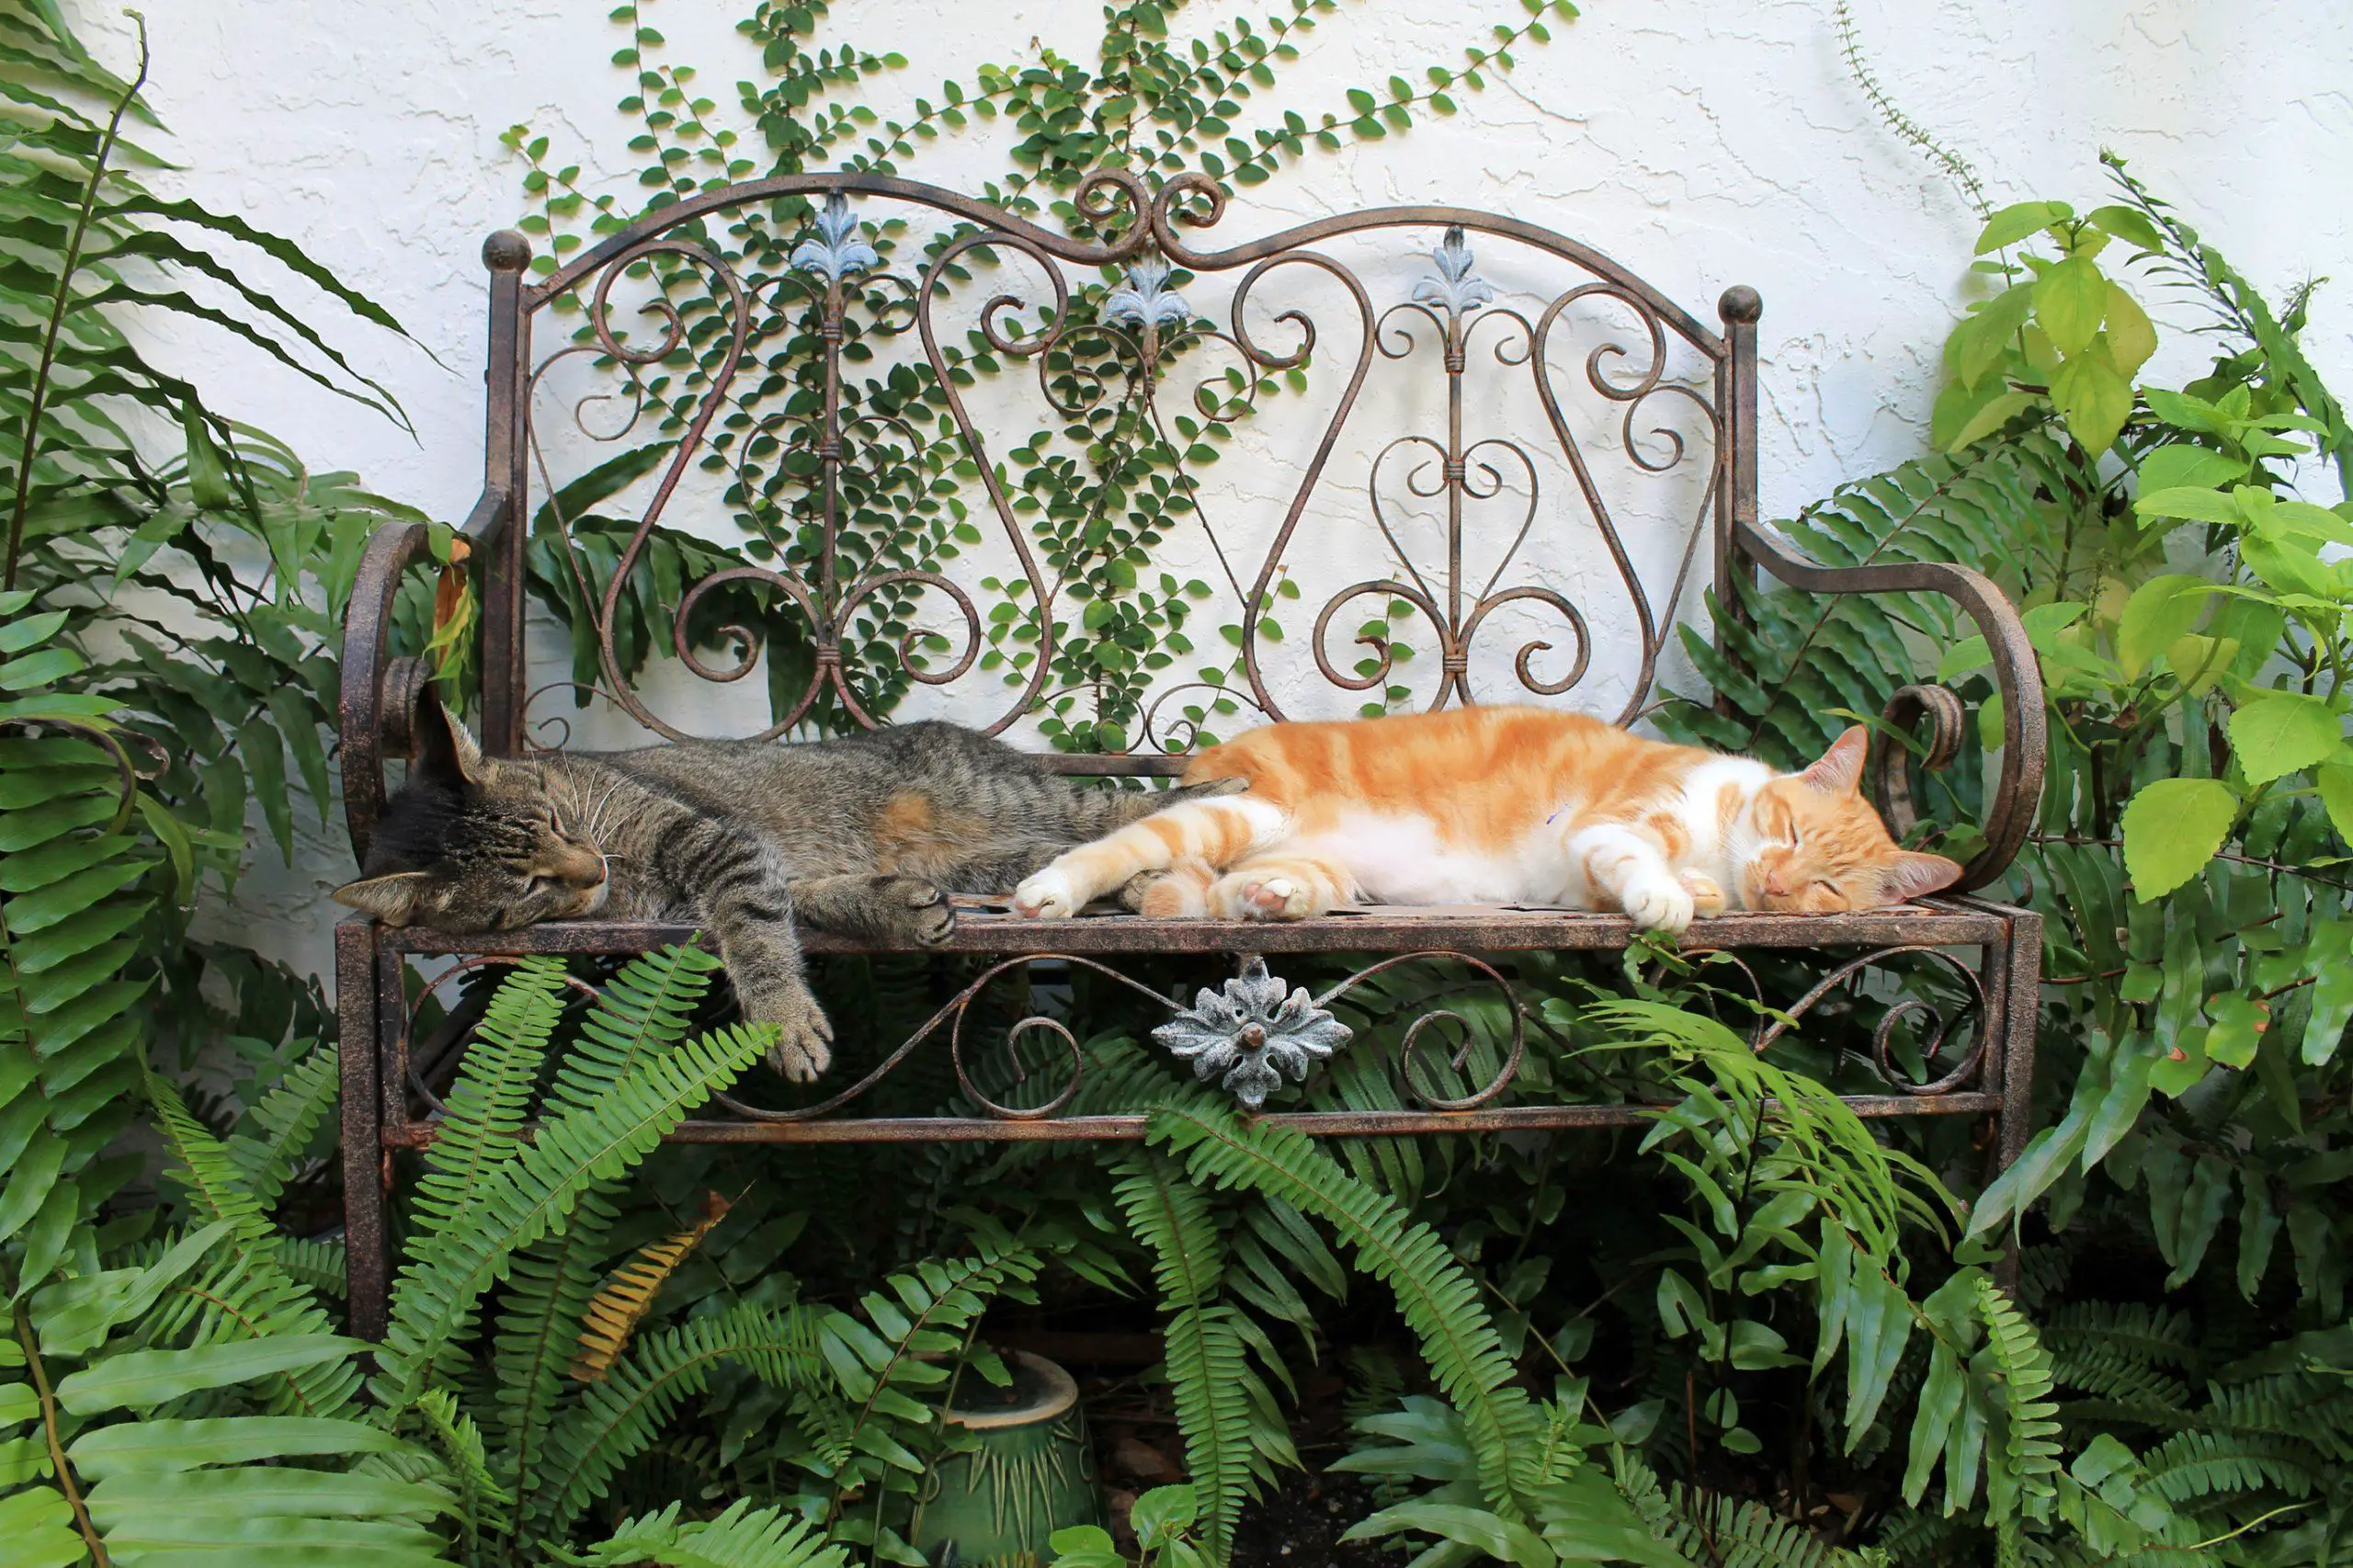 Cats sleeping on a bench within the garden amongst the ferns